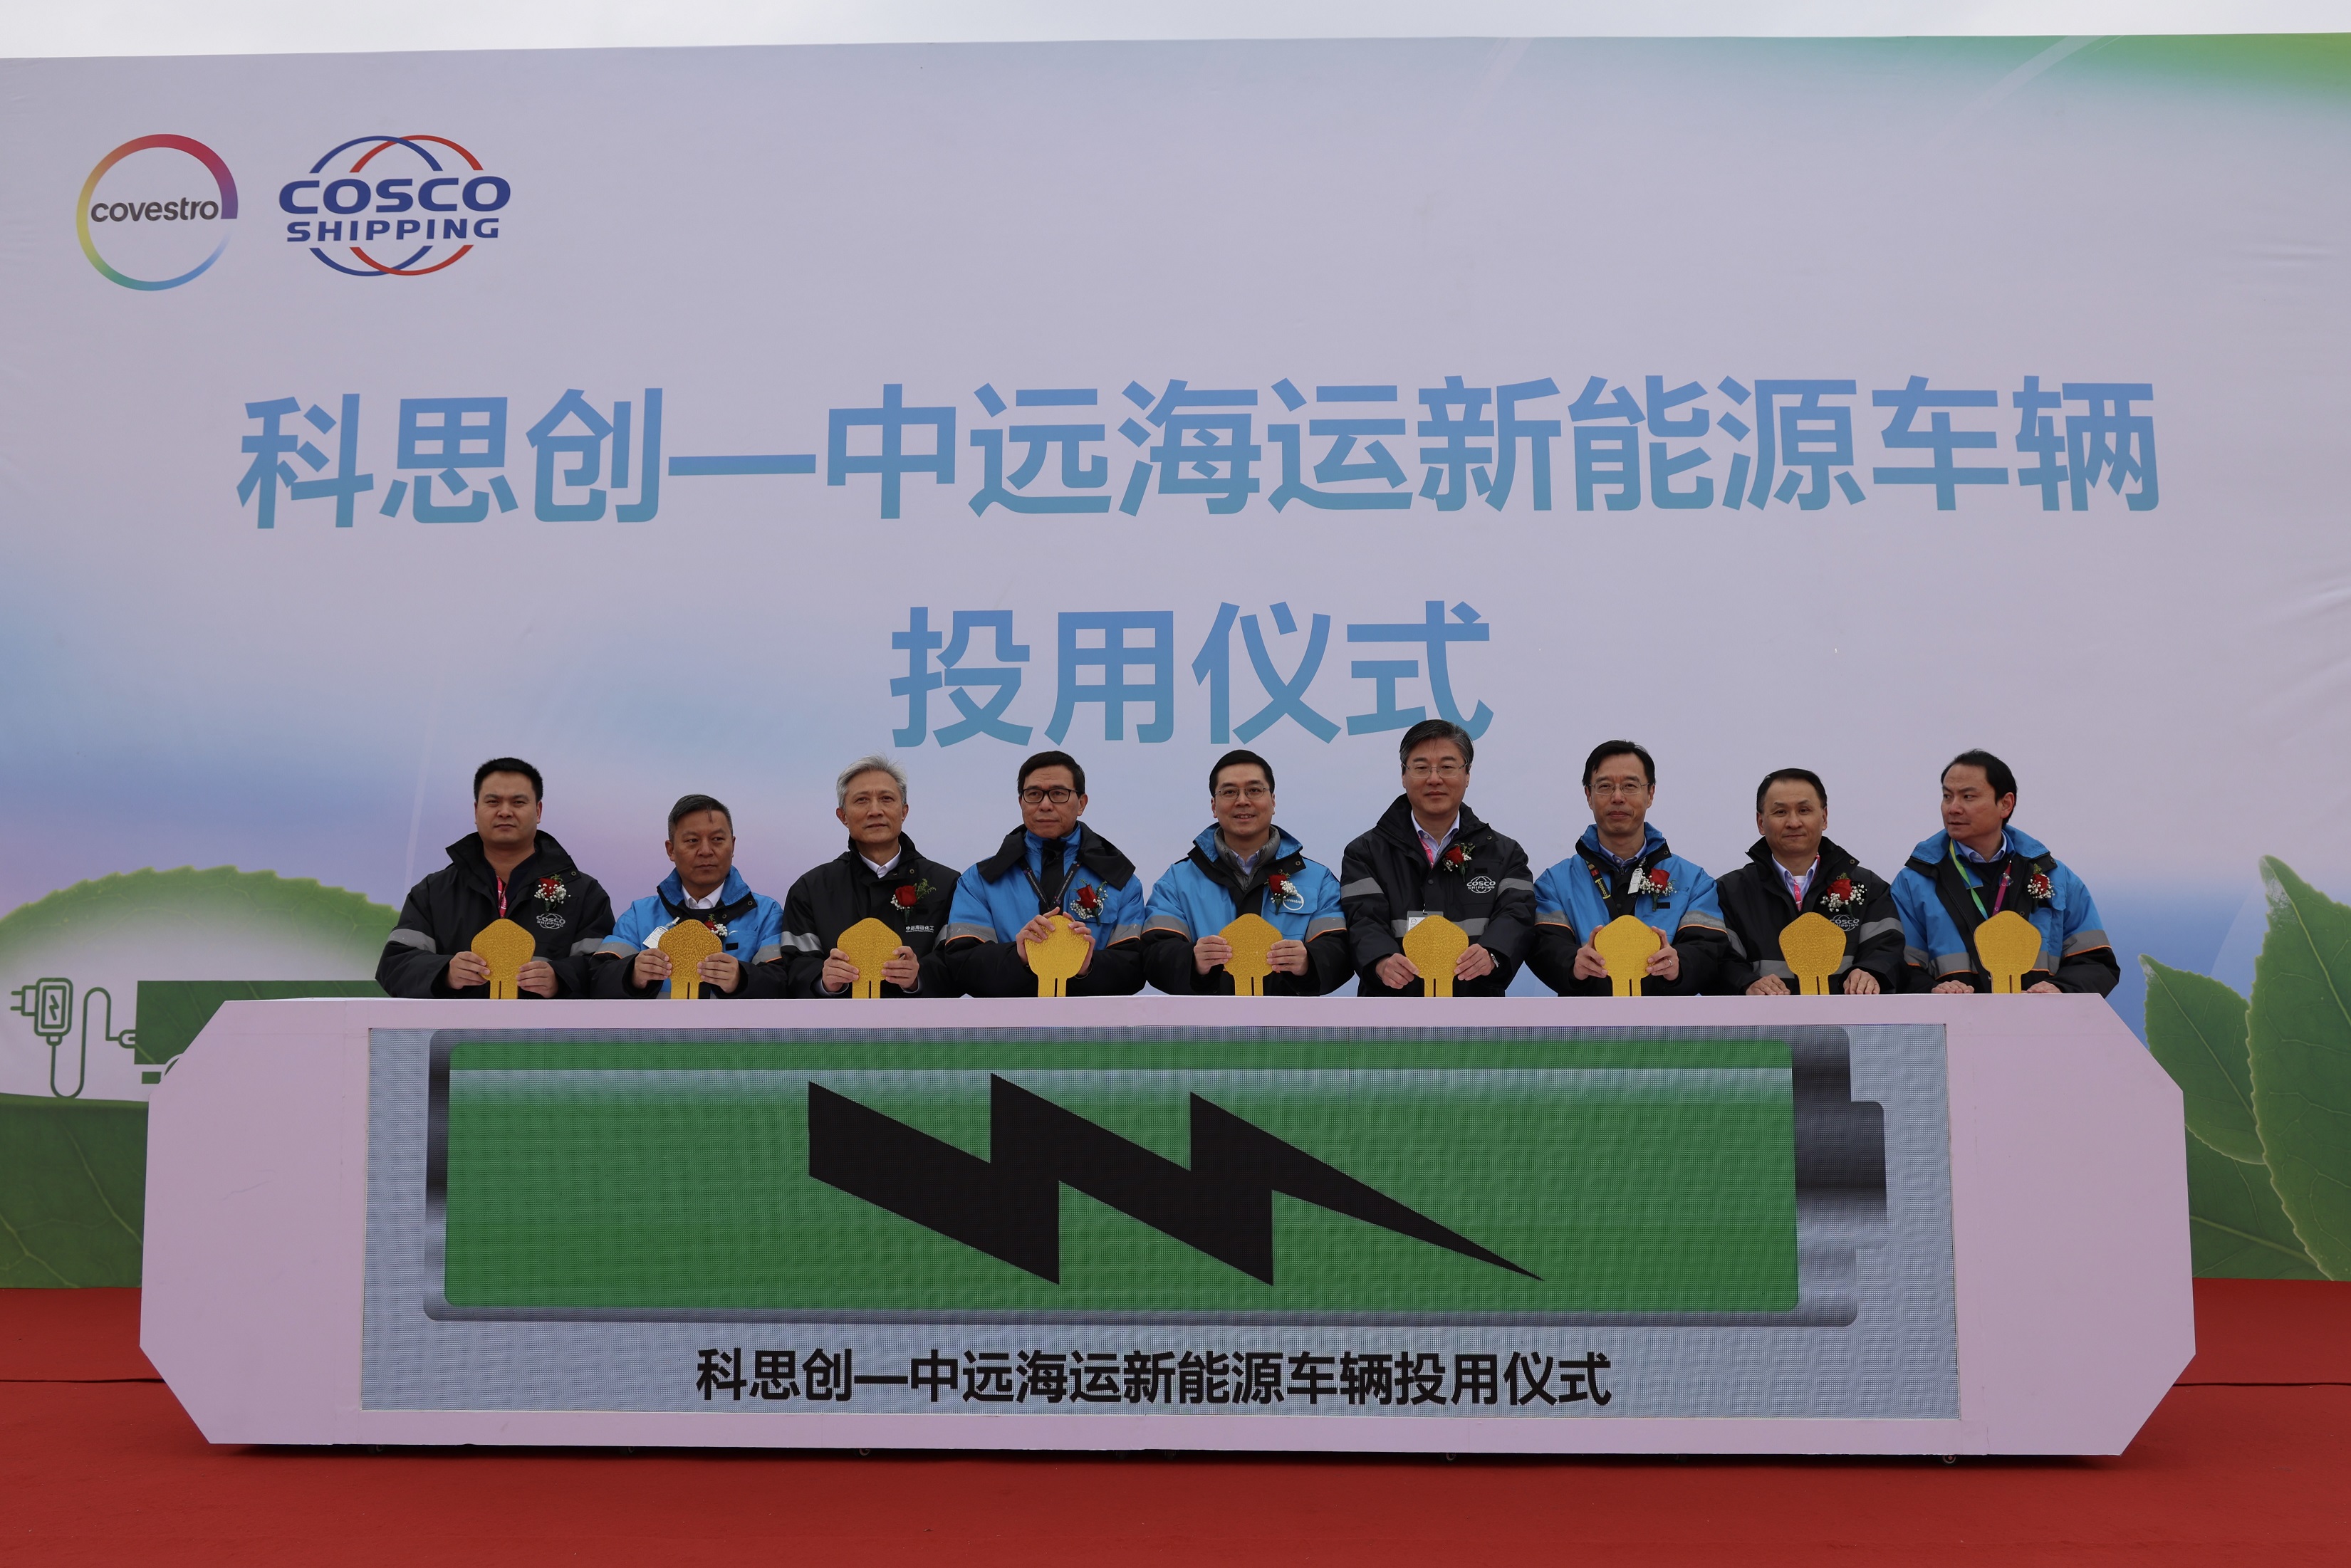 20231219_Covestro-Introduces-Electric-Trucks-for-Chemical-Shuttling-in-Shanghai-Pic 1.jpg